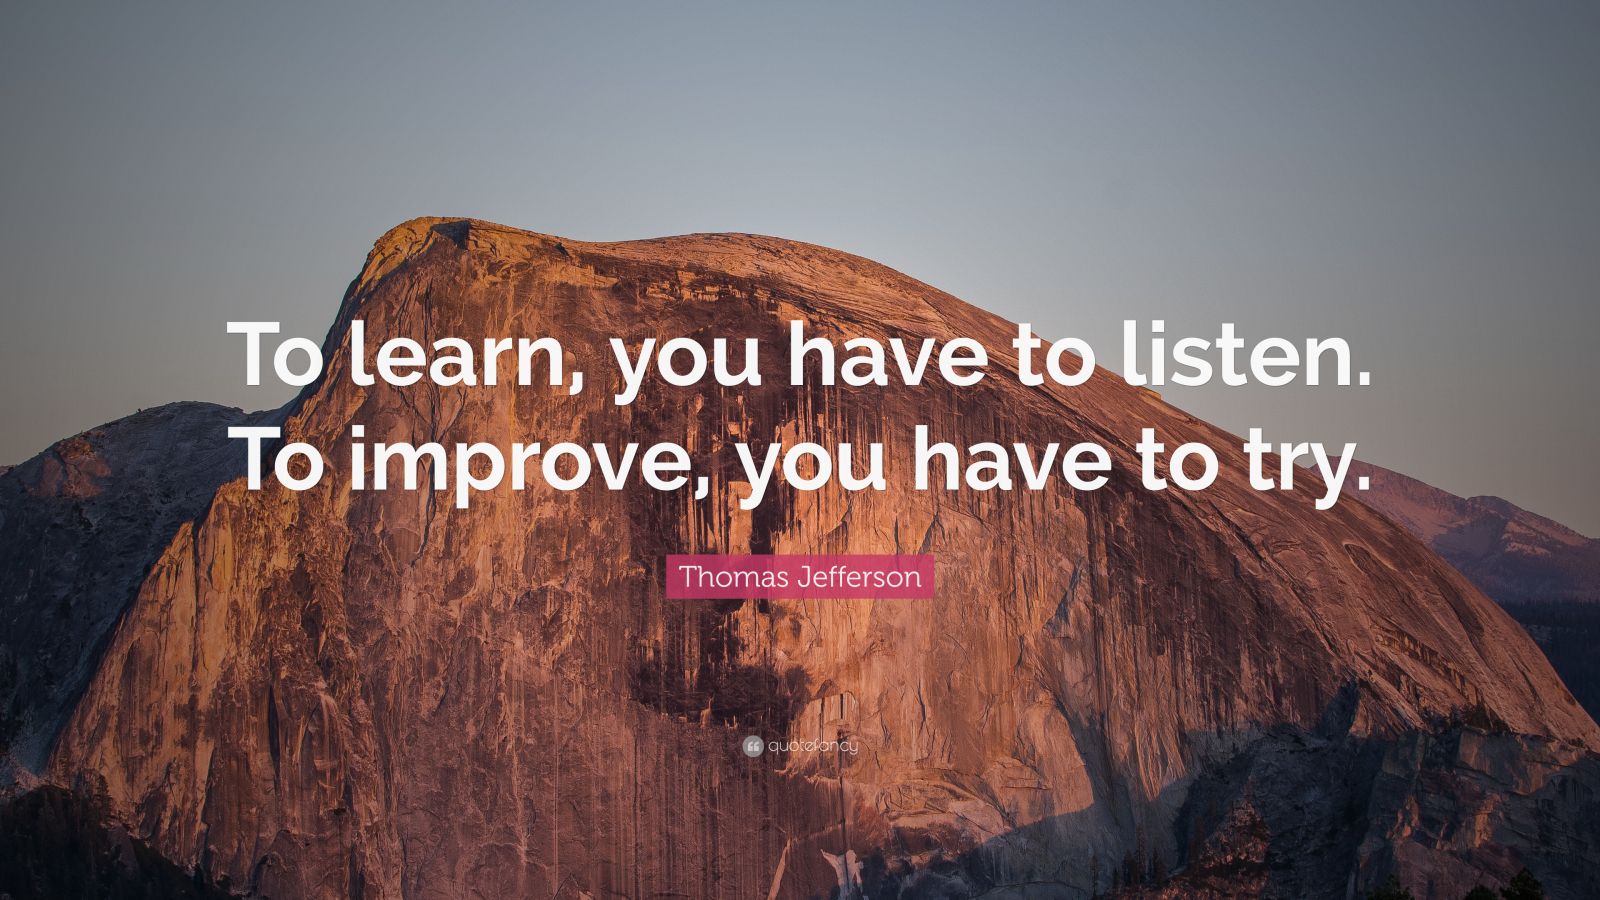 Thomas Jefferson Quote: “To learn, you have to listen. To improve, you